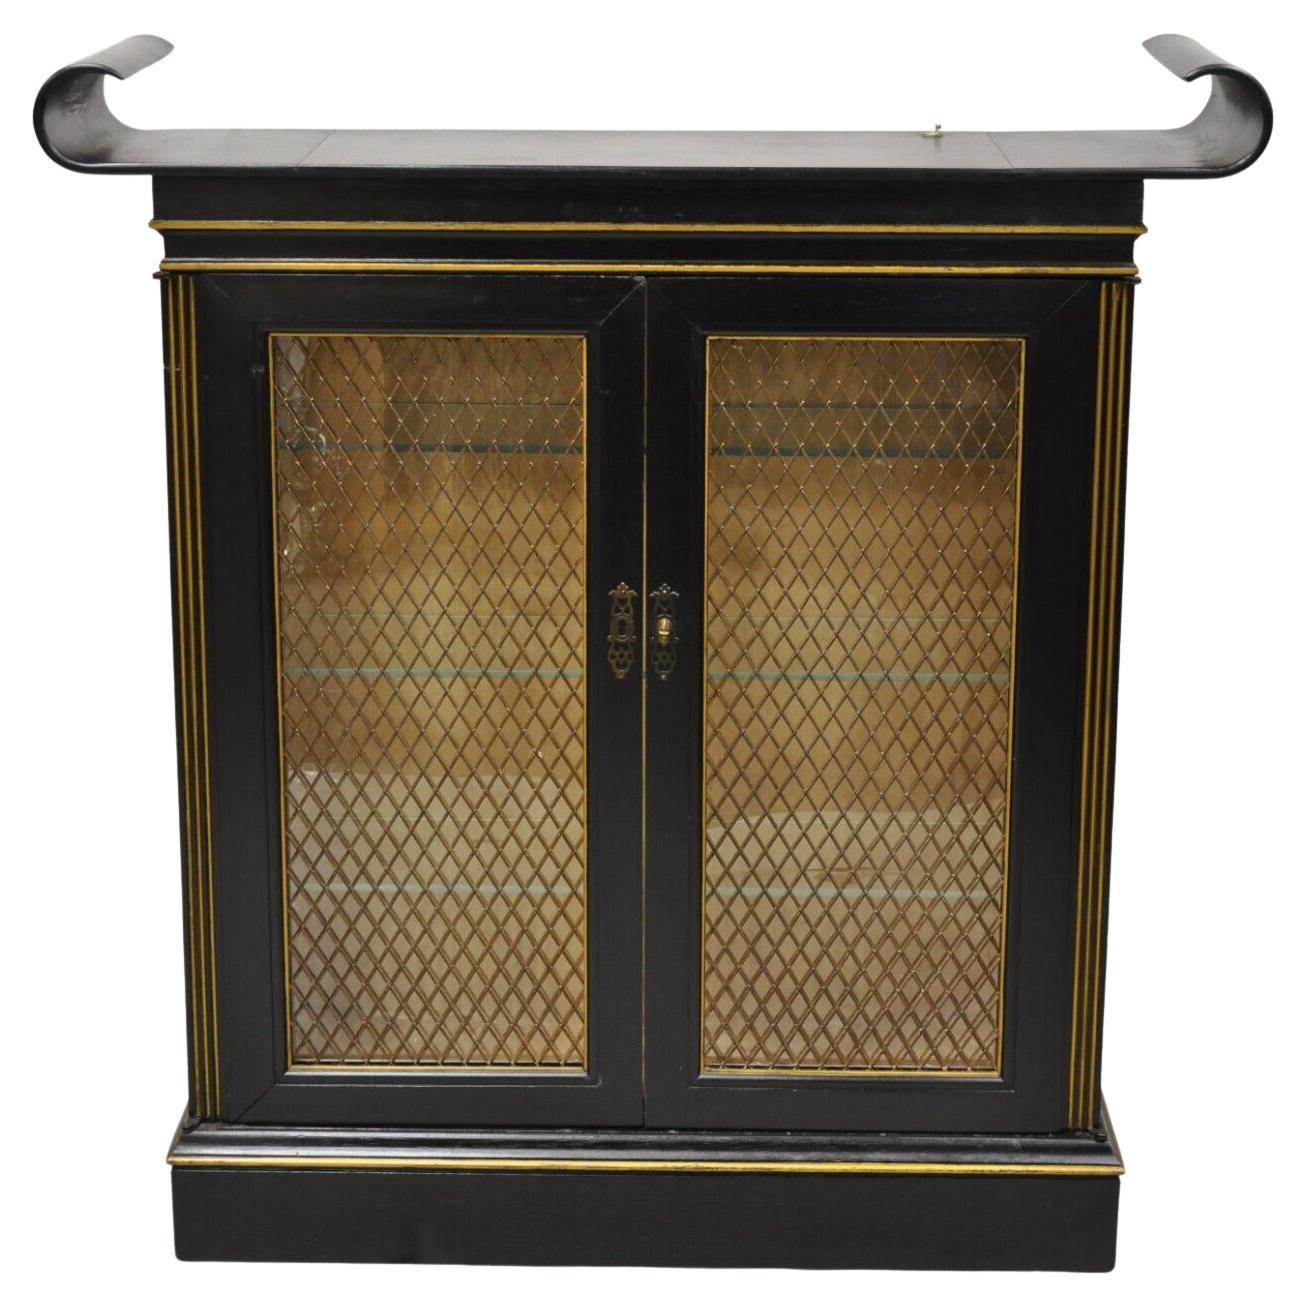 Vintage Chinoiserie Ebonized Black Lacquer Lighted Pagoda Display Cabinet Curio